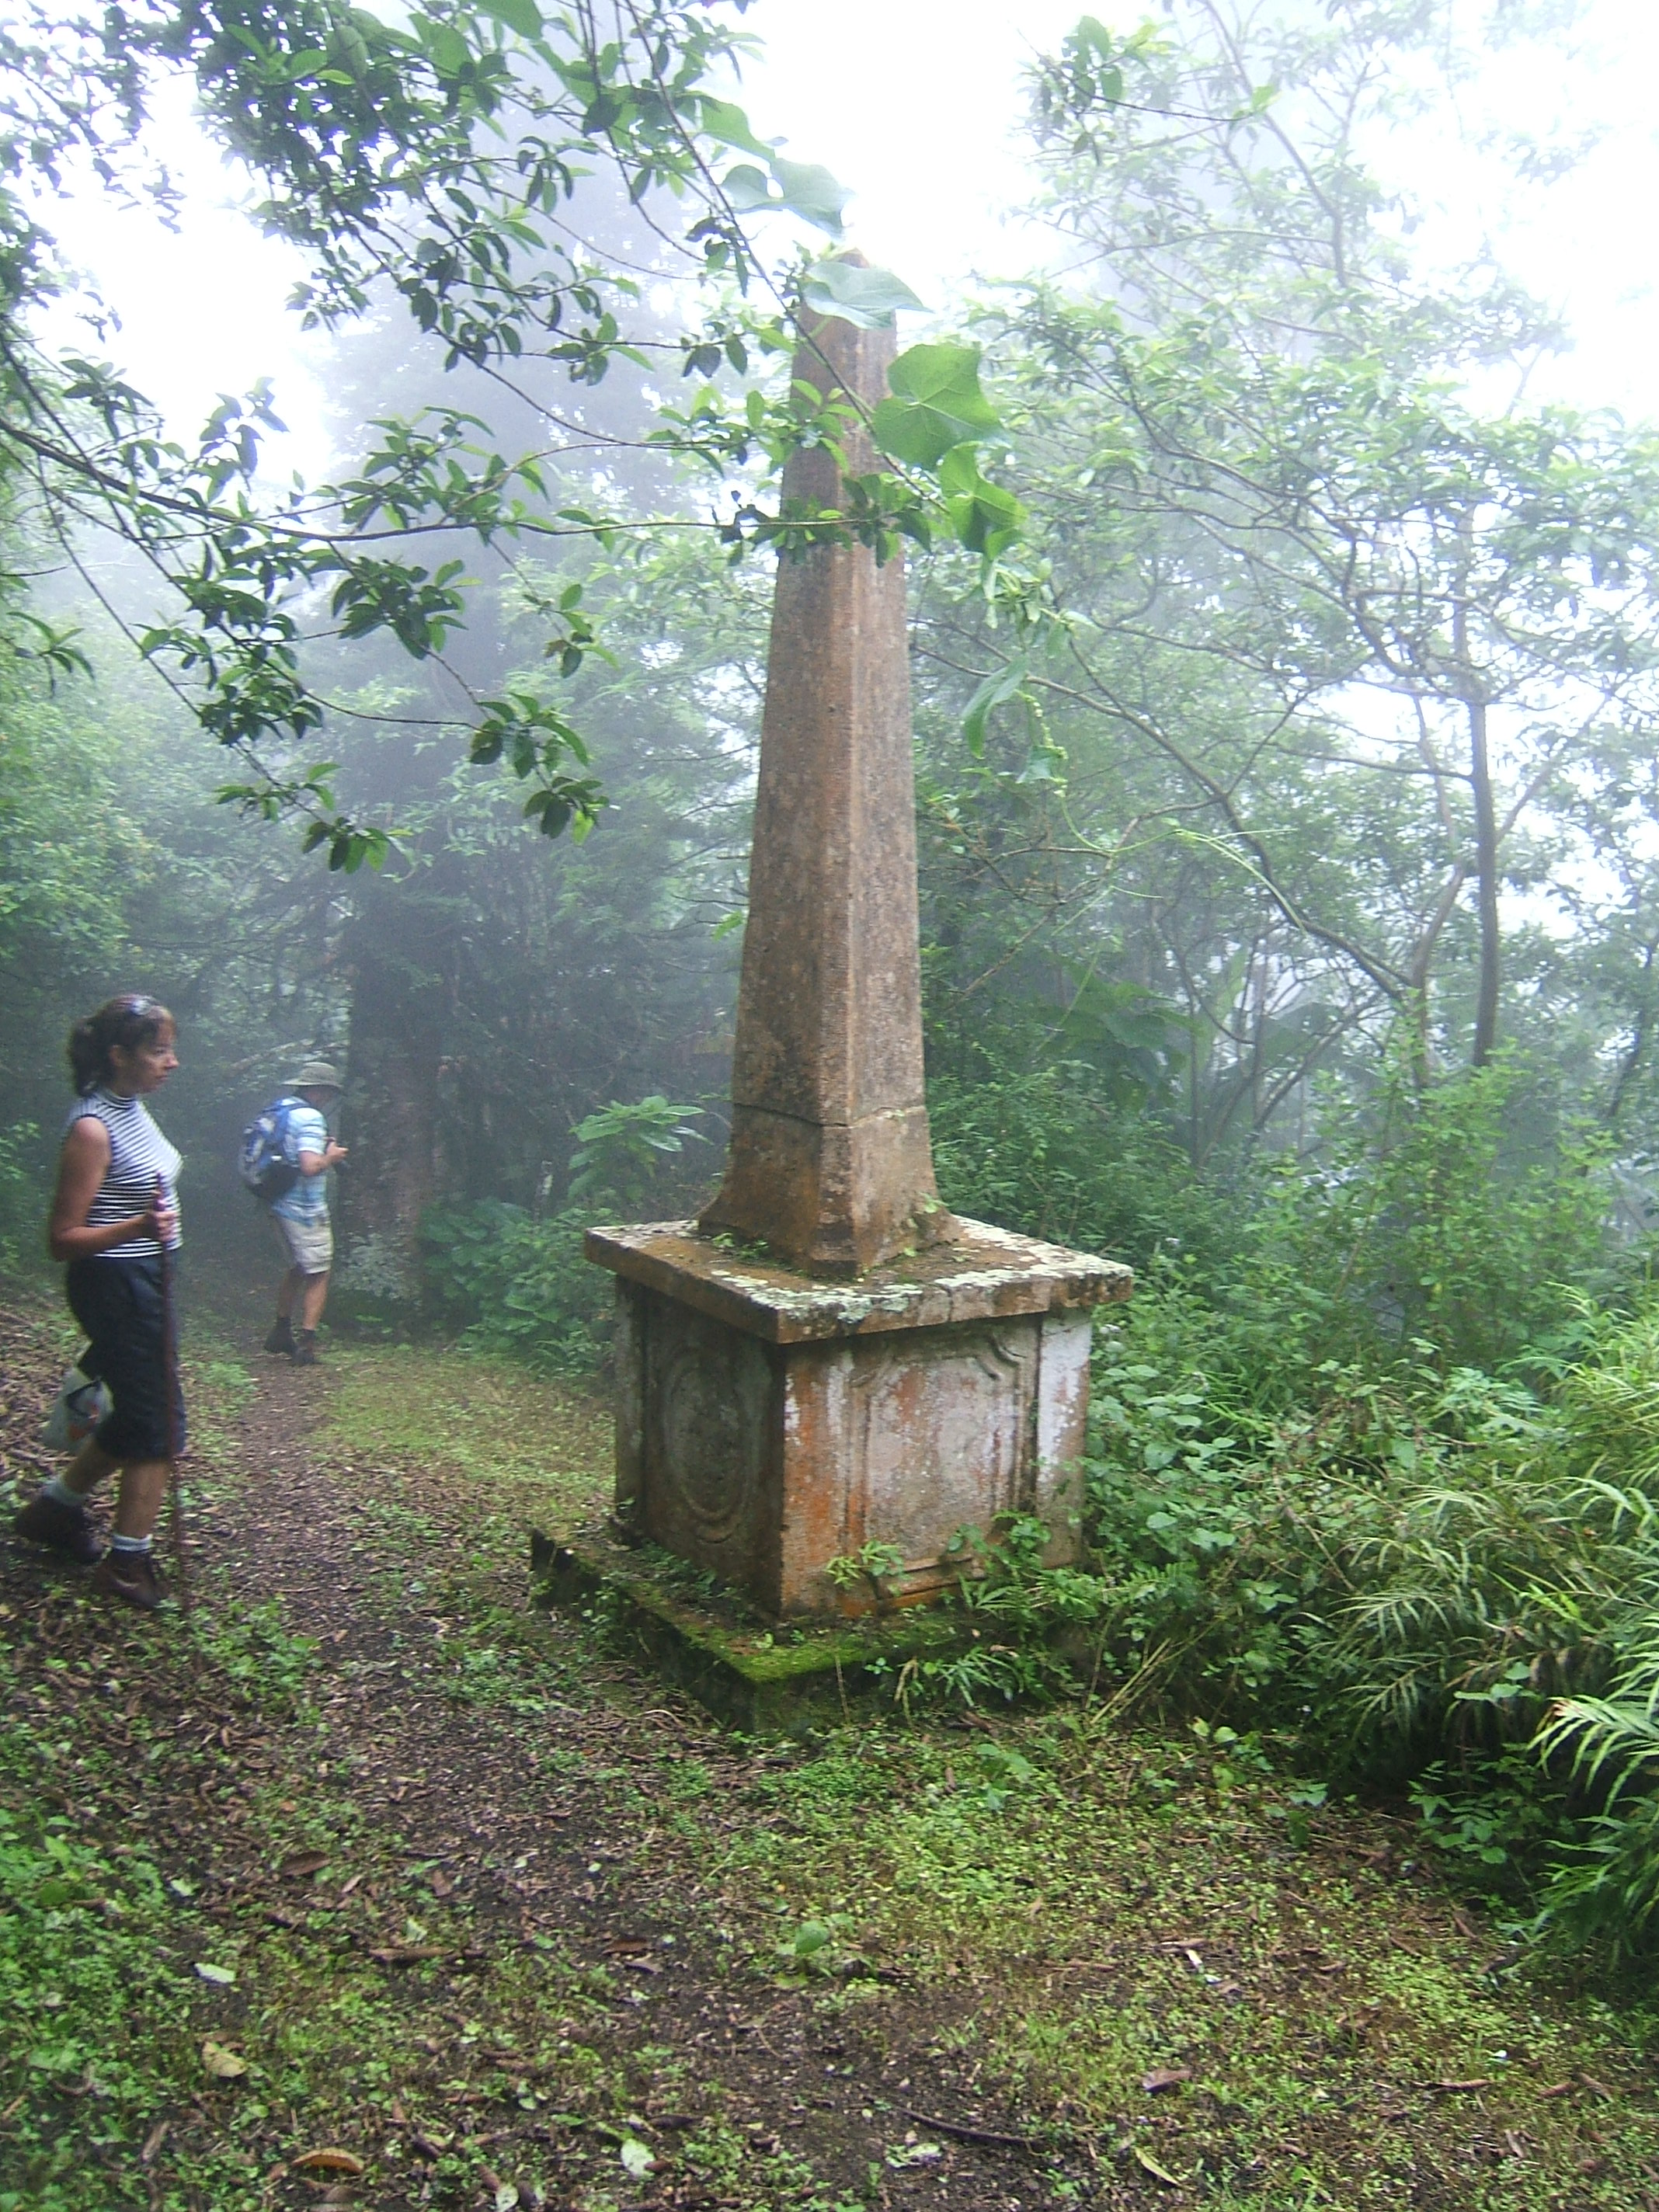 Ascension Island, Elliott's Path, The monument to the builders of the path, Walkopedia